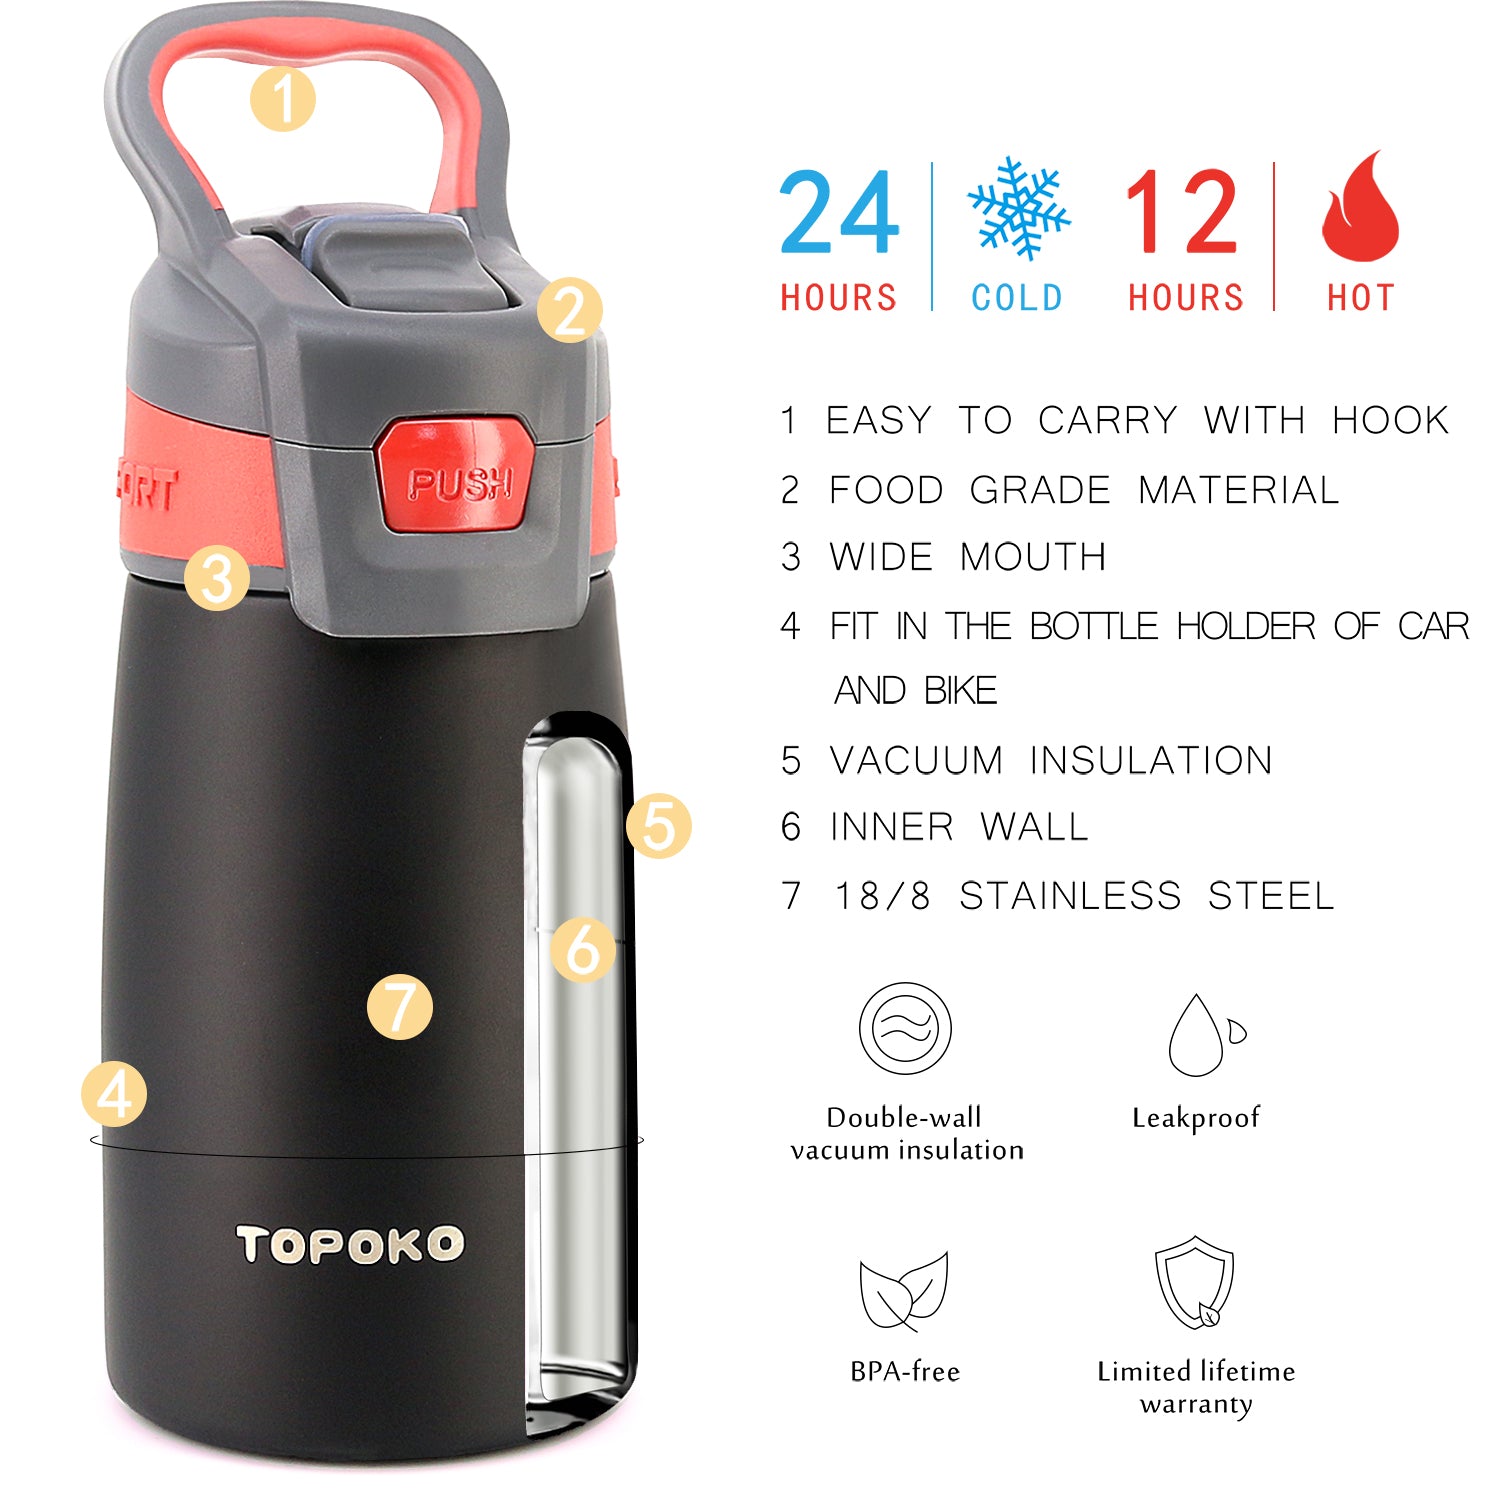 TOPOKO AUTO FLIP 12 OZ Stainless Steel Kids Water Bottle for Girls Double Wall Beverage Carry Kid Cup Vacuum Insulated Leak Proof Thermos Handle Spout BPA-Free Sports Bottle